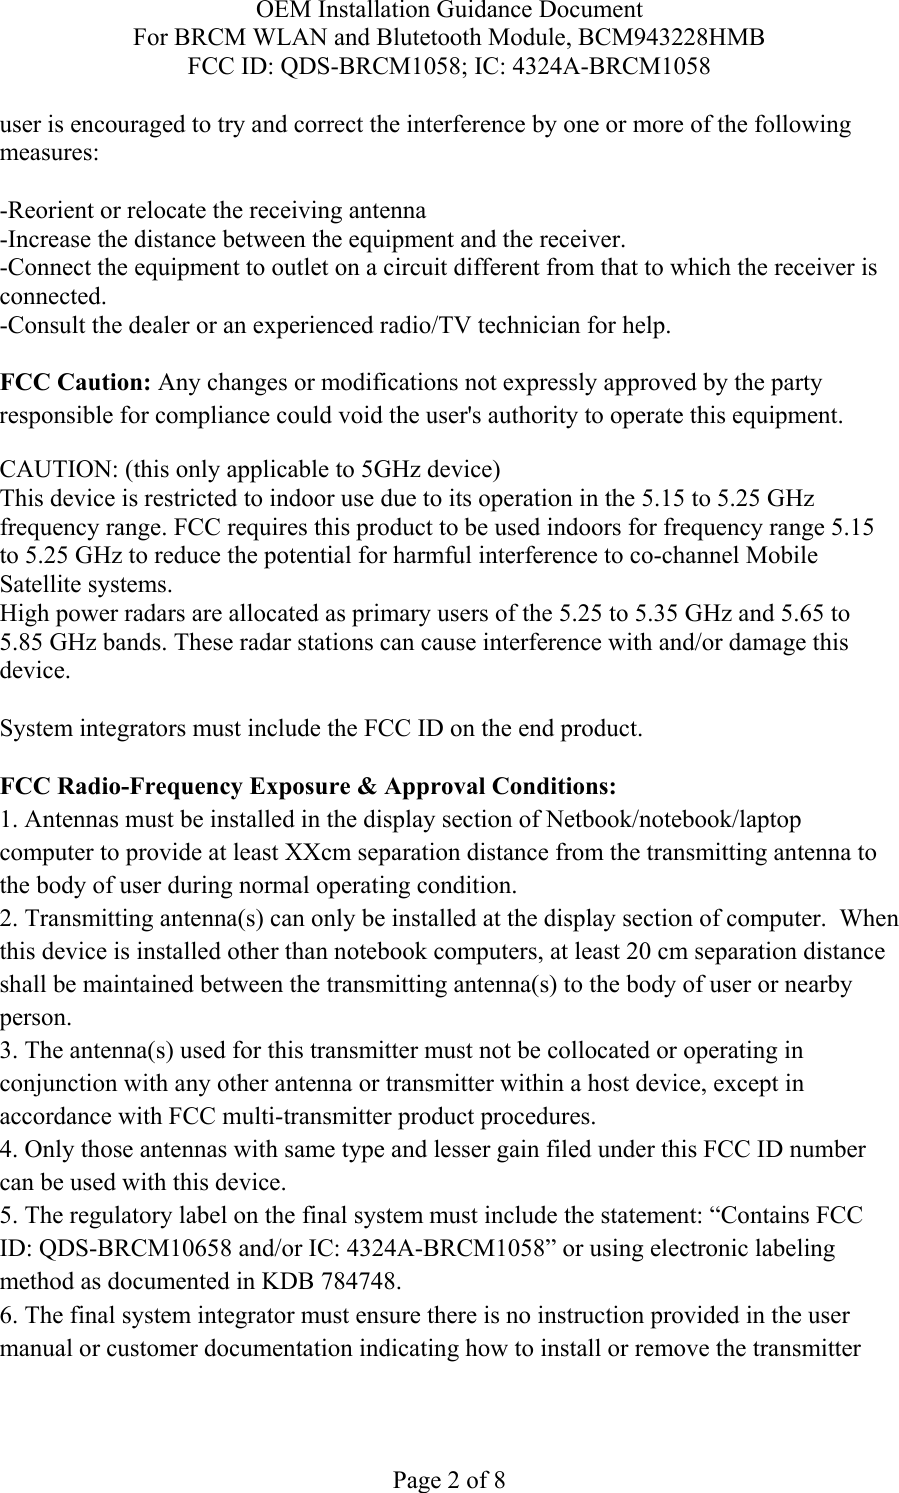 OEM Installation Guidance Document For BRCM WLAN and Blutetooth Module, BCM943228HMB FCC ID: QDS-BRCM1058; IC: 4324A-BRCM1058  Page 2 of 8 user is encouraged to try and correct the interference by one or more of the following measures:   -Reorient or relocate the receiving antenna -Increase the distance between the equipment and the receiver. -Connect the equipment to outlet on a circuit different from that to which the receiver is connected. -Consult the dealer or an experienced radio/TV technician for help.  FCC Caution: Any changes or modifications not expressly approved by the party responsible for compliance could void the user&apos;s authority to operate this equipment. CAUTION: (this only applicable to 5GHz device) This device is restricted to indoor use due to its operation in the 5.15 to 5.25 GHz frequency range. FCC requires this product to be used indoors for frequency range 5.15 to 5.25 GHz to reduce the potential for harmful interference to co-channel Mobile Satellite systems. High power radars are allocated as primary users of the 5.25 to 5.35 GHz and 5.65 to 5.85 GHz bands. These radar stations can cause interference with and/or damage this device.  System integrators must include the FCC ID on the end product.   FCC Radio-Frequency Exposure &amp; Approval Conditions: 1. Antennas must be installed in the display section of Netbook/notebook/laptop computer to provide at least XXcm separation distance from the transmitting antenna to the body of user during normal operating condition. 2. Transmitting antenna(s) can only be installed at the display section of computer.  When this device is installed other than notebook computers, at least 20 cm separation distance shall be maintained between the transmitting antenna(s) to the body of user or nearby person. 3. The antenna(s) used for this transmitter must not be collocated or operating in conjunction with any other antenna or transmitter within a host device, except in accordance with FCC multi-transmitter product procedures. 4. Only those antennas with same type and lesser gain filed under this FCC ID number can be used with this device. 5. The regulatory label on the final system must include the statement: “Contains FCC ID: QDS-BRCM10658 and/or IC: 4324A-BRCM1058” or using electronic labeling method as documented in KDB 784748. 6. The final system integrator must ensure there is no instruction provided in the user manual or customer documentation indicating how to install or remove the transmitter 